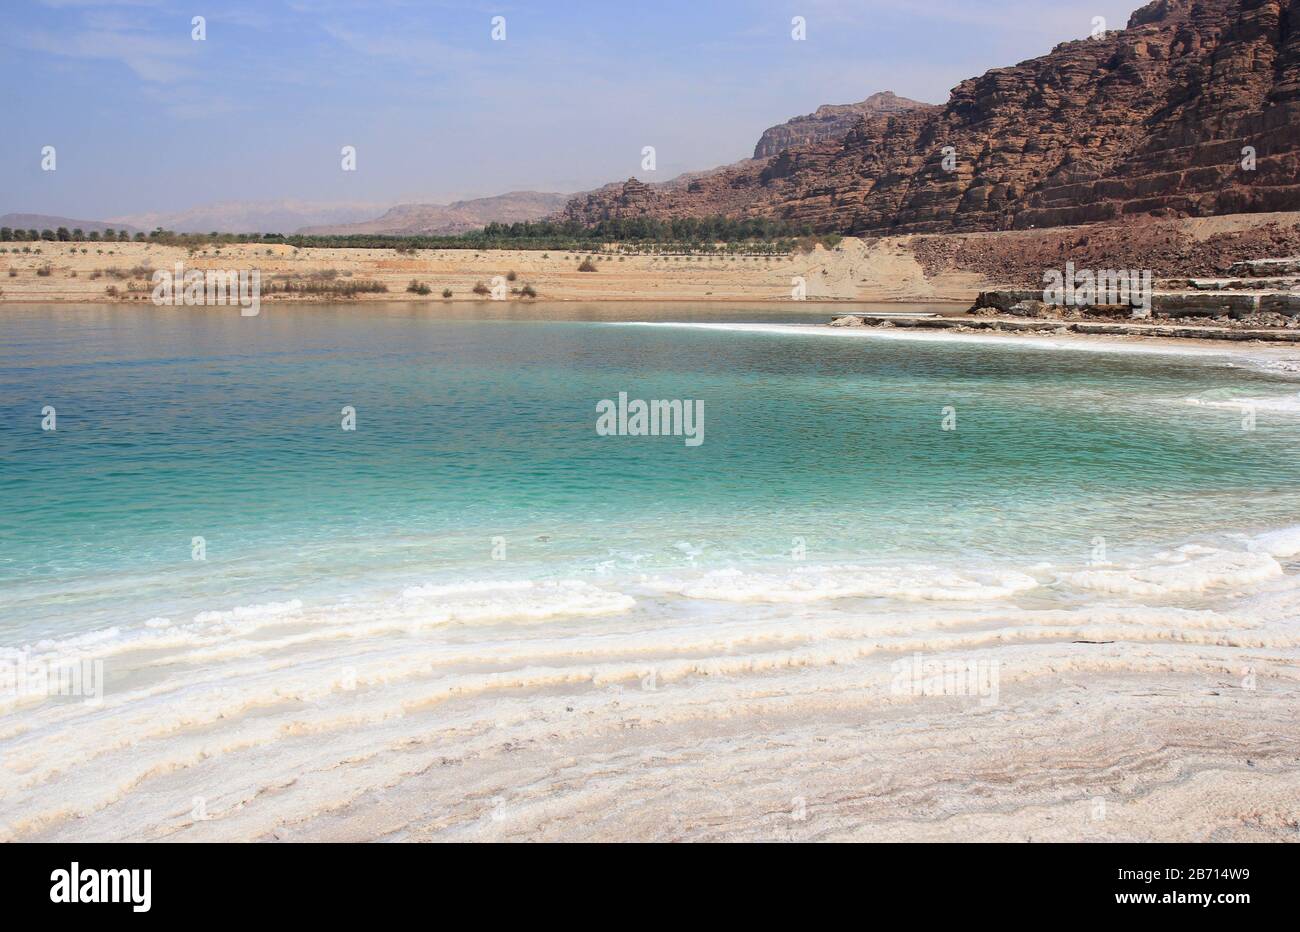 Salty bay on the Dead sea route, lowest land elevation area on Earth, Jordan, Western Asia Stock Photo